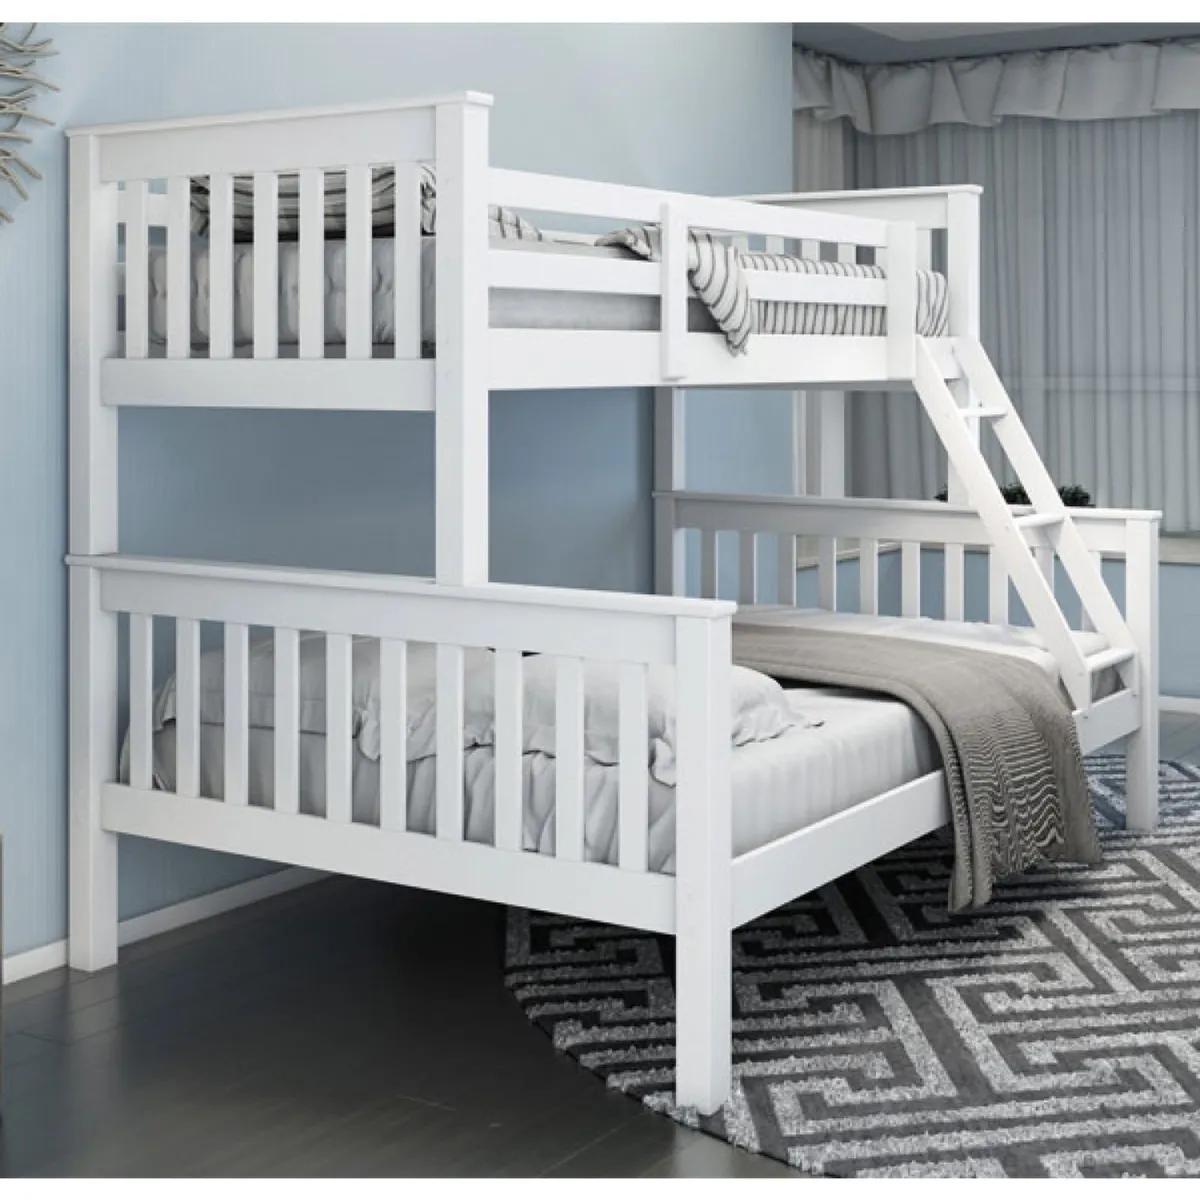 Main picture triple bunk bed yes 445€